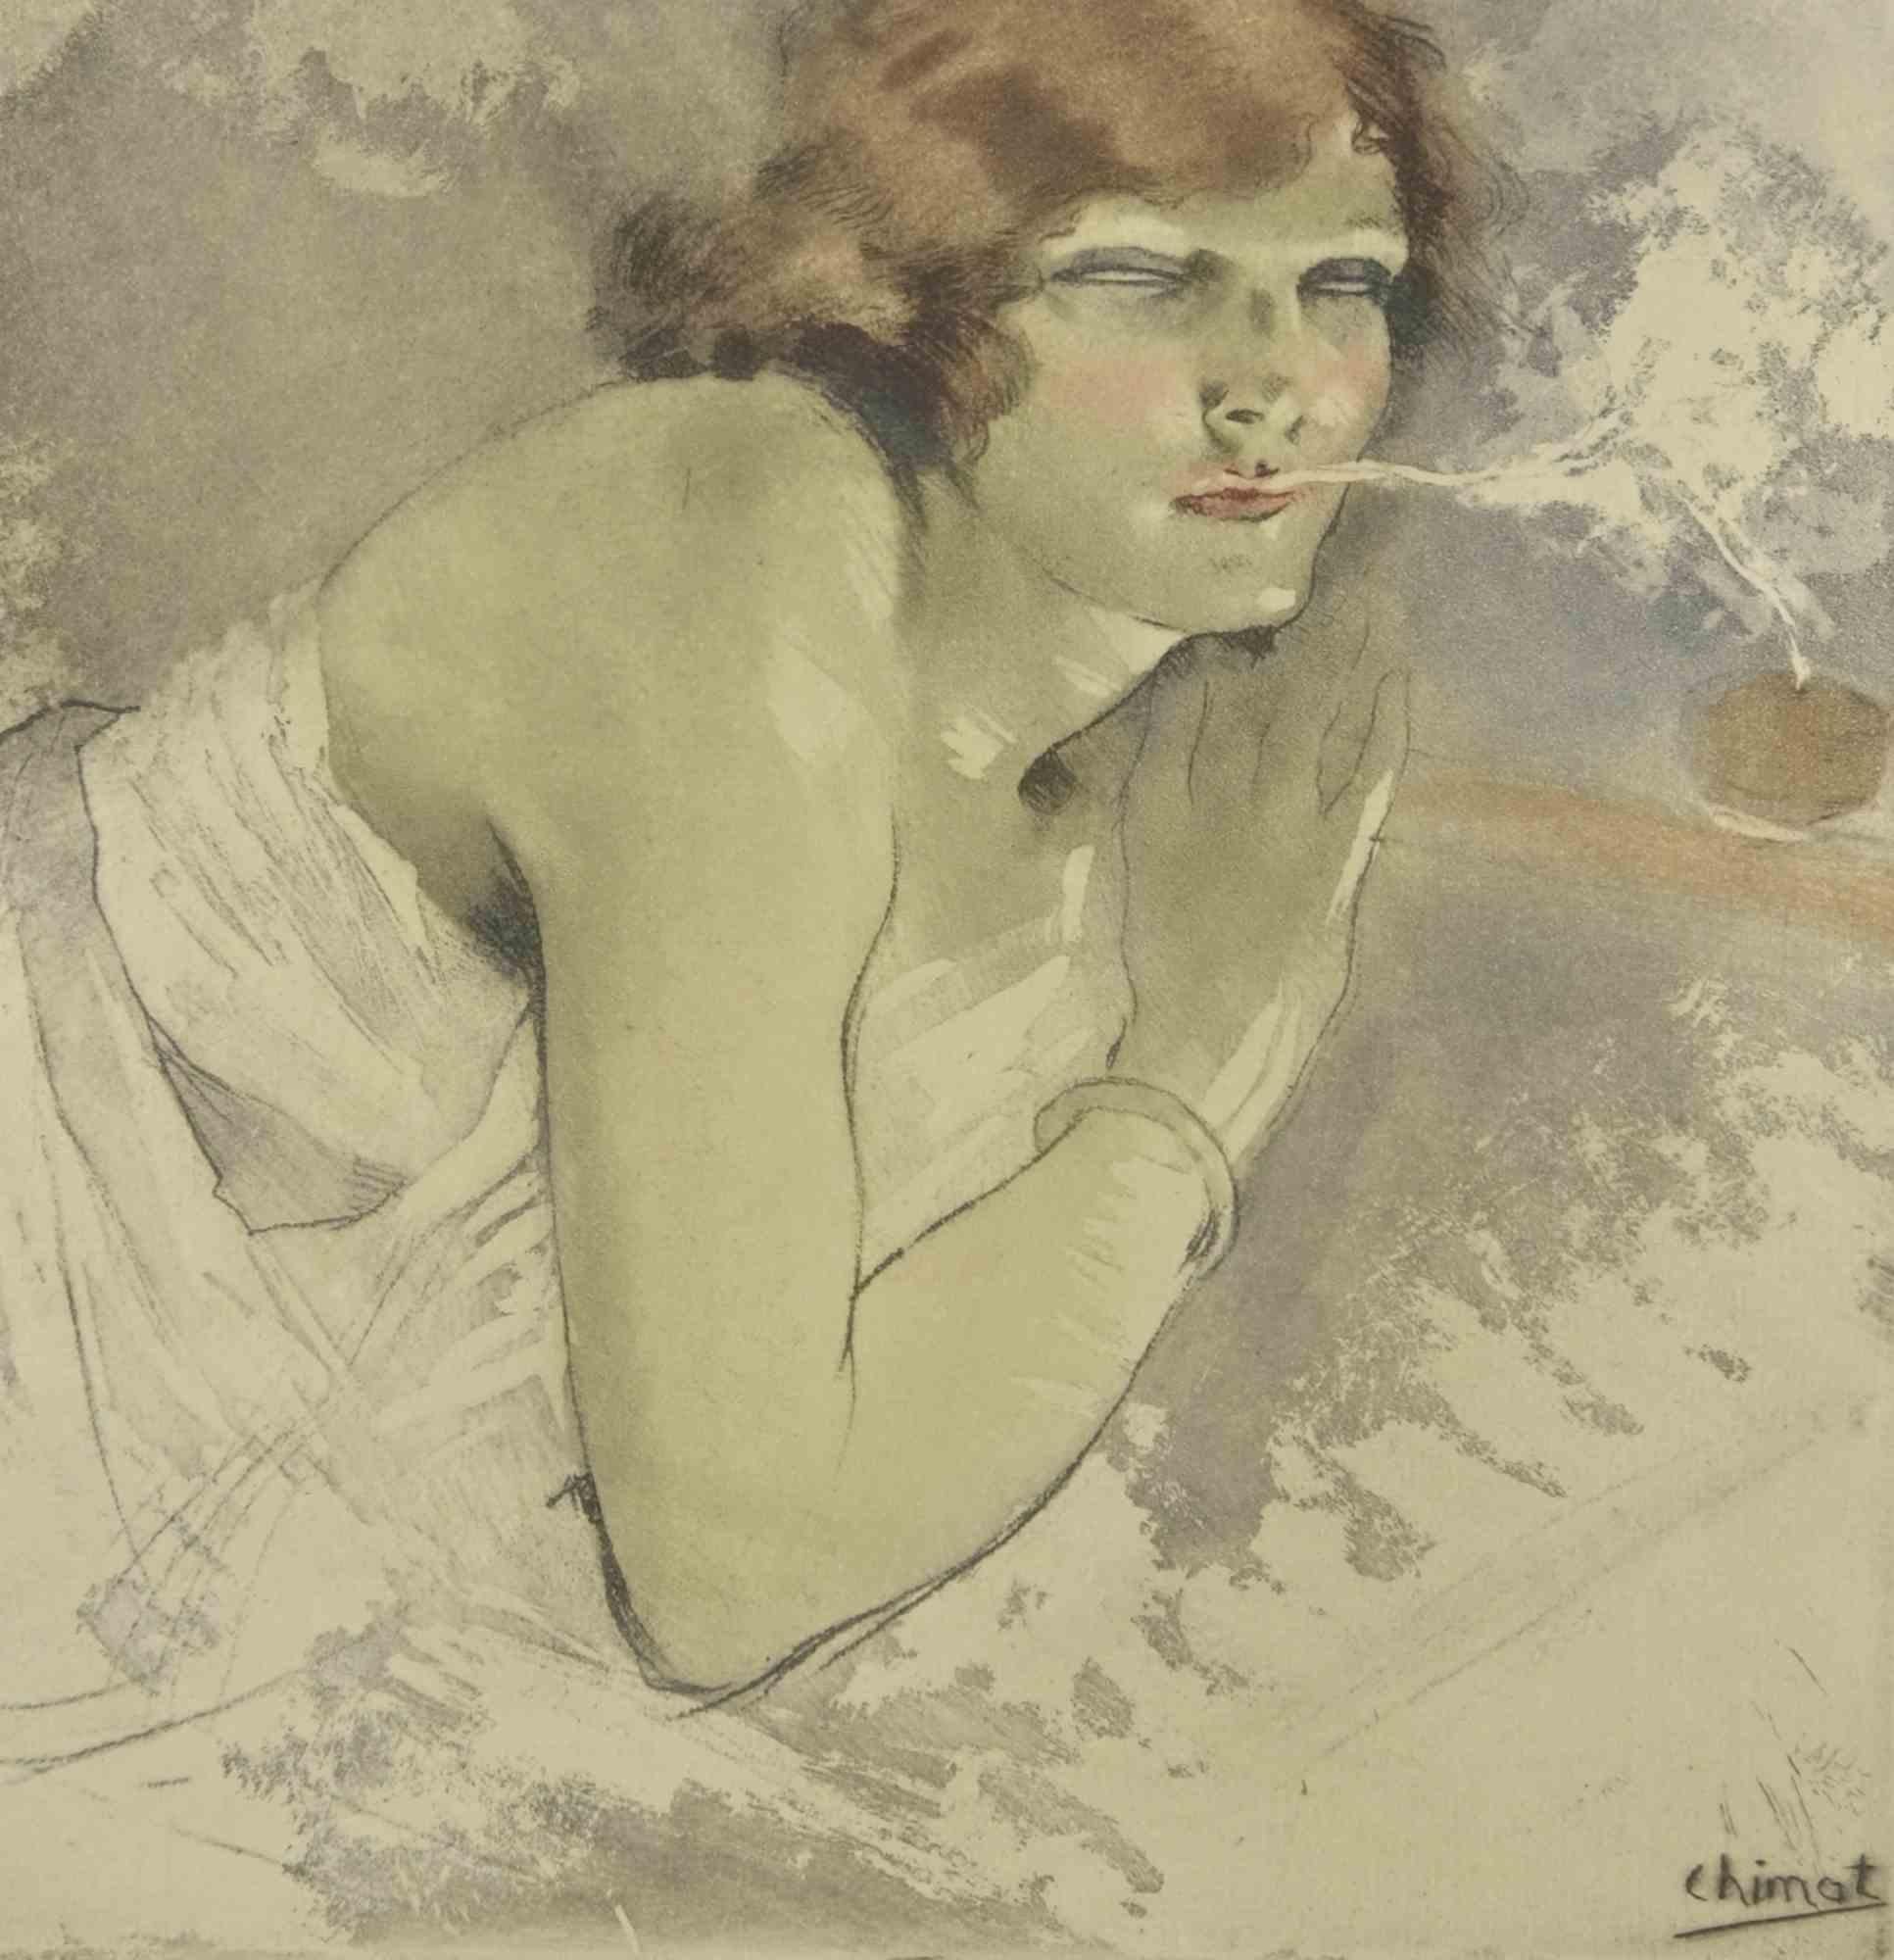 The Smoking Girl is an etching realized by Edouard Chimot in the 1930s.

Signed on the plate by the artist on the lower right corner.

Good conditions.

Édouard Chimot (26 November 1880 – 7 June 1959) was a French artist, illustrator, and editor